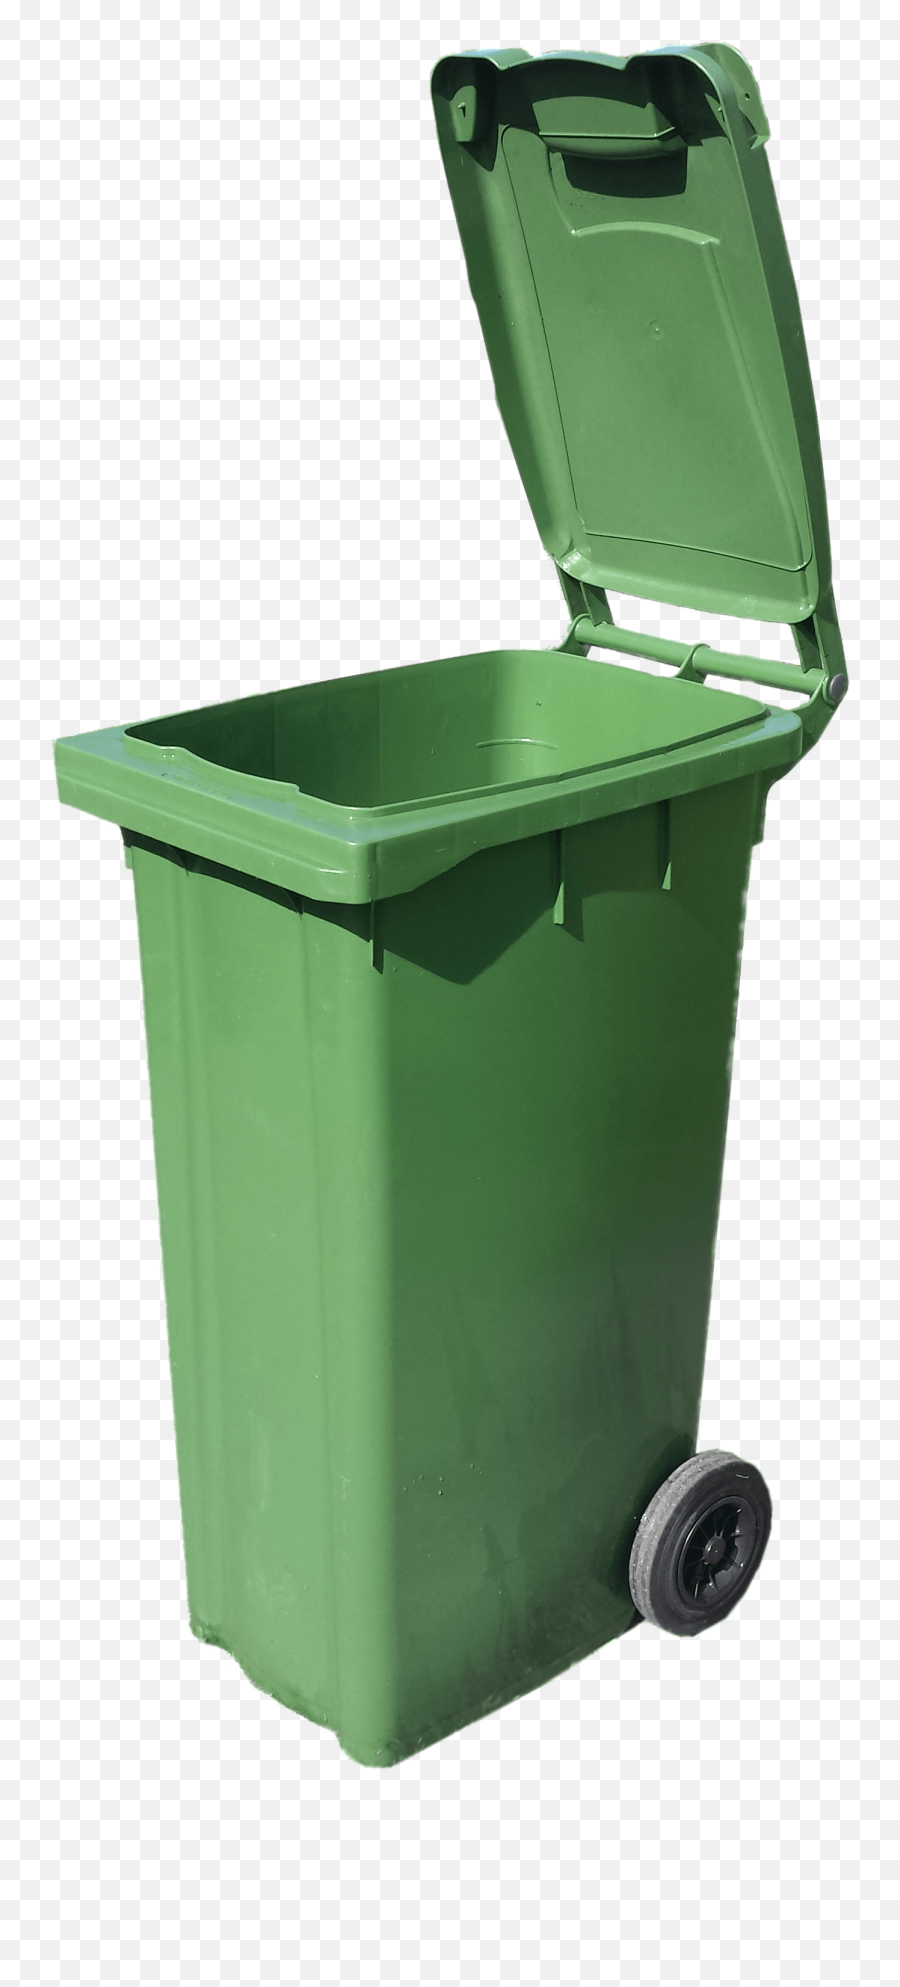 Waste Container Recycling Bin - Trash Bin Png,Trash Can Transparent Background